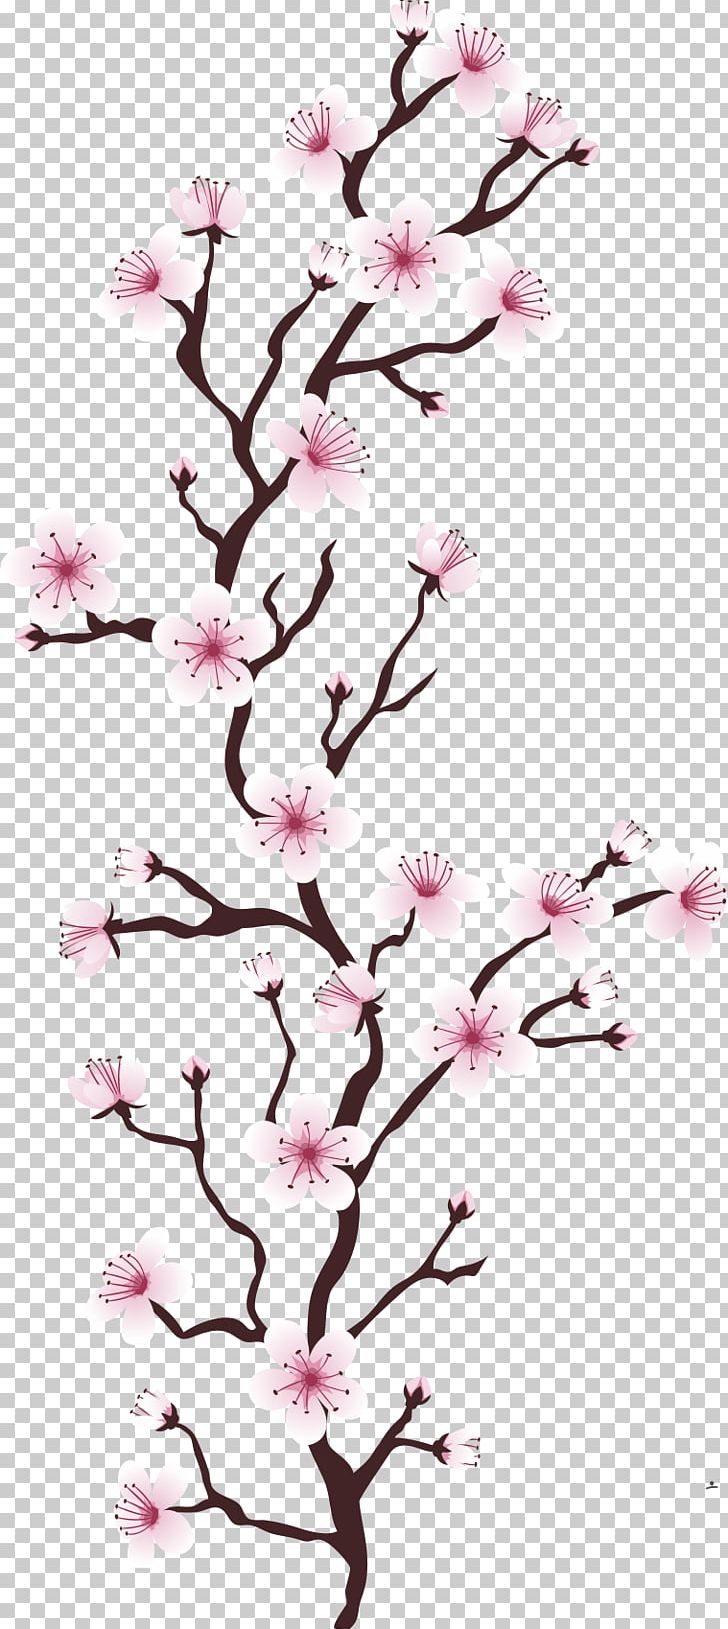 Cherry Blossom Flower Tree Euclidean Cerasus PNG, Clipart, Blossom, Blossoms, Blossoms Vector, Branch, Branches Free PNG Download